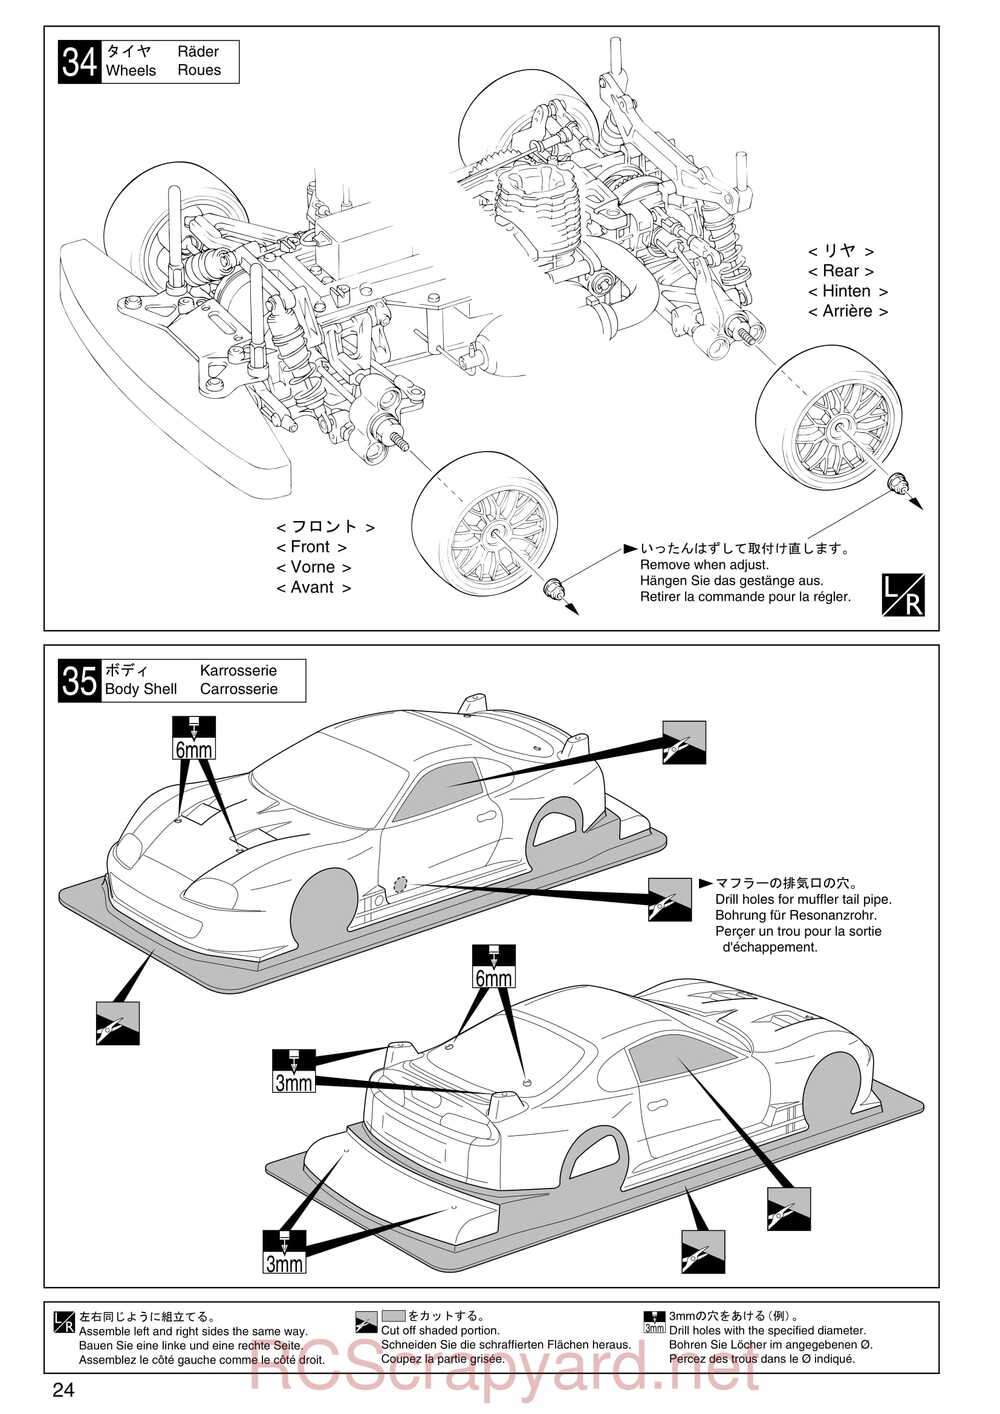 Kyosho - 31122 - V-One S2 - Manual - Page 24